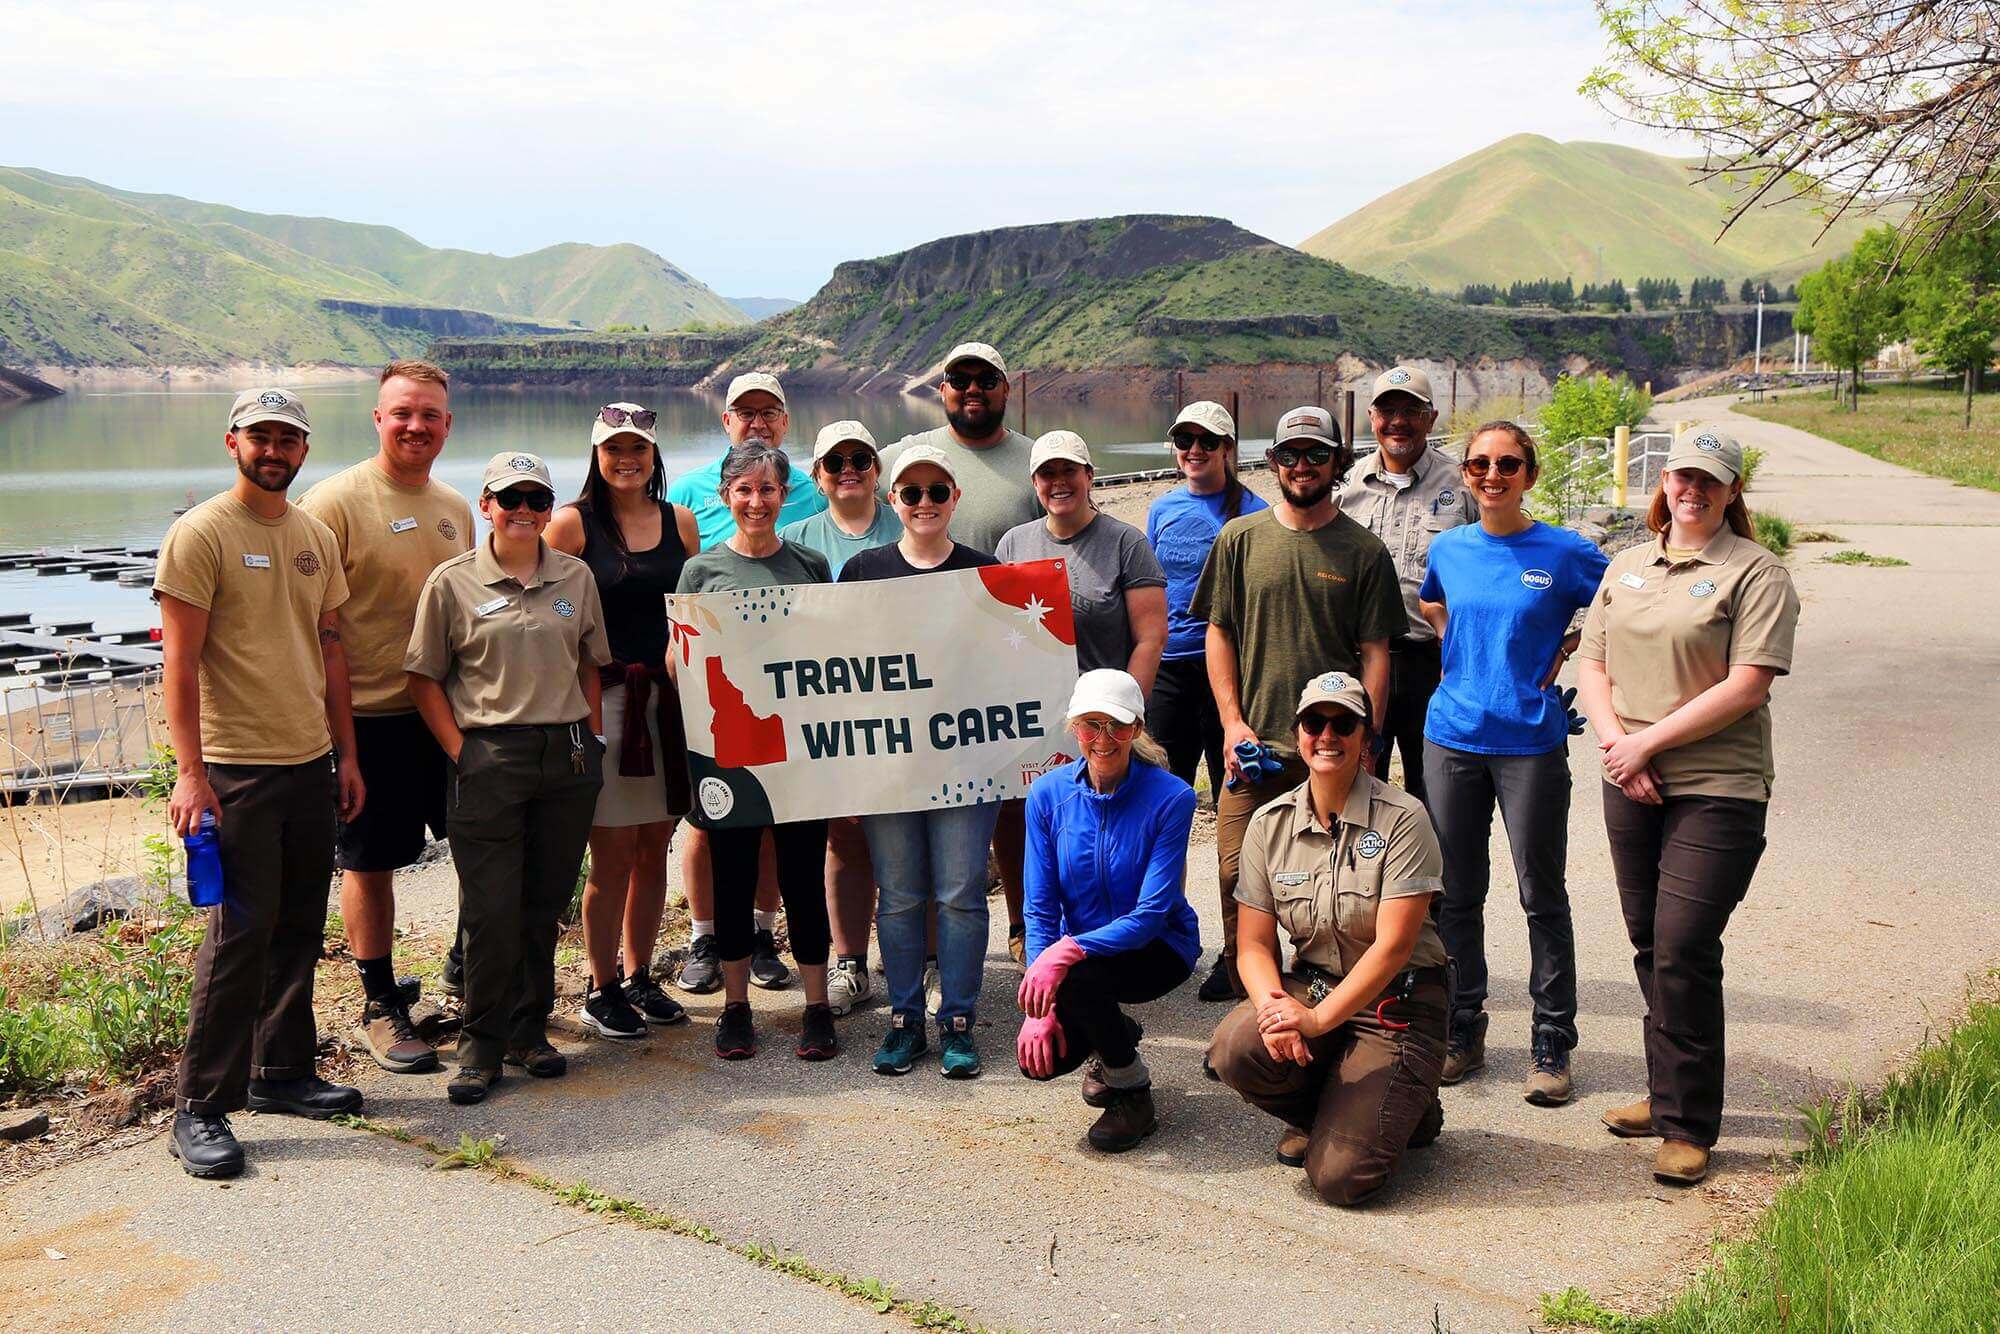 A group of volunteers posing for a photo at a Travel With Care event holding a sign reading "Travel With Care."